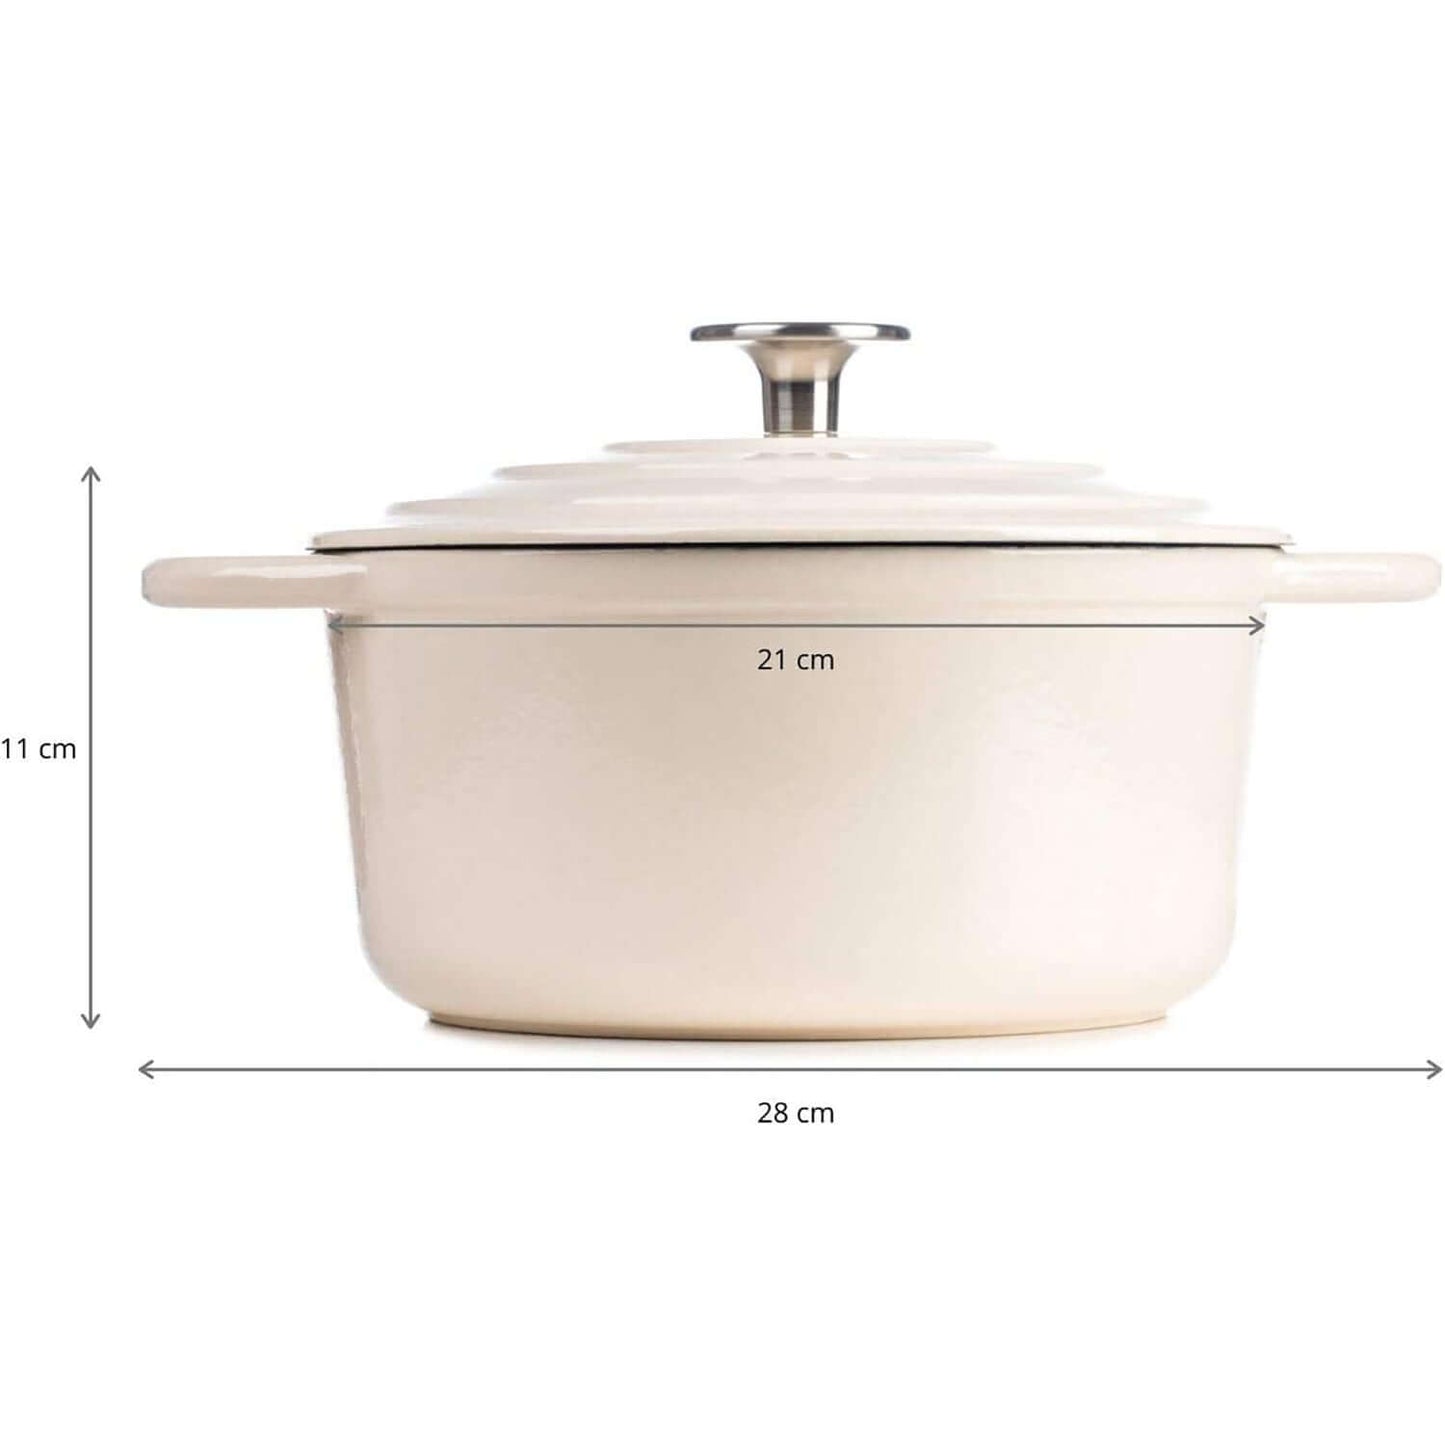 2.7L , 3.9L or 5.2L Round Cast Iron Casserole Oven Roasting Dish - 6 Colours - Induction & Gas Safe Dutch - with Lid